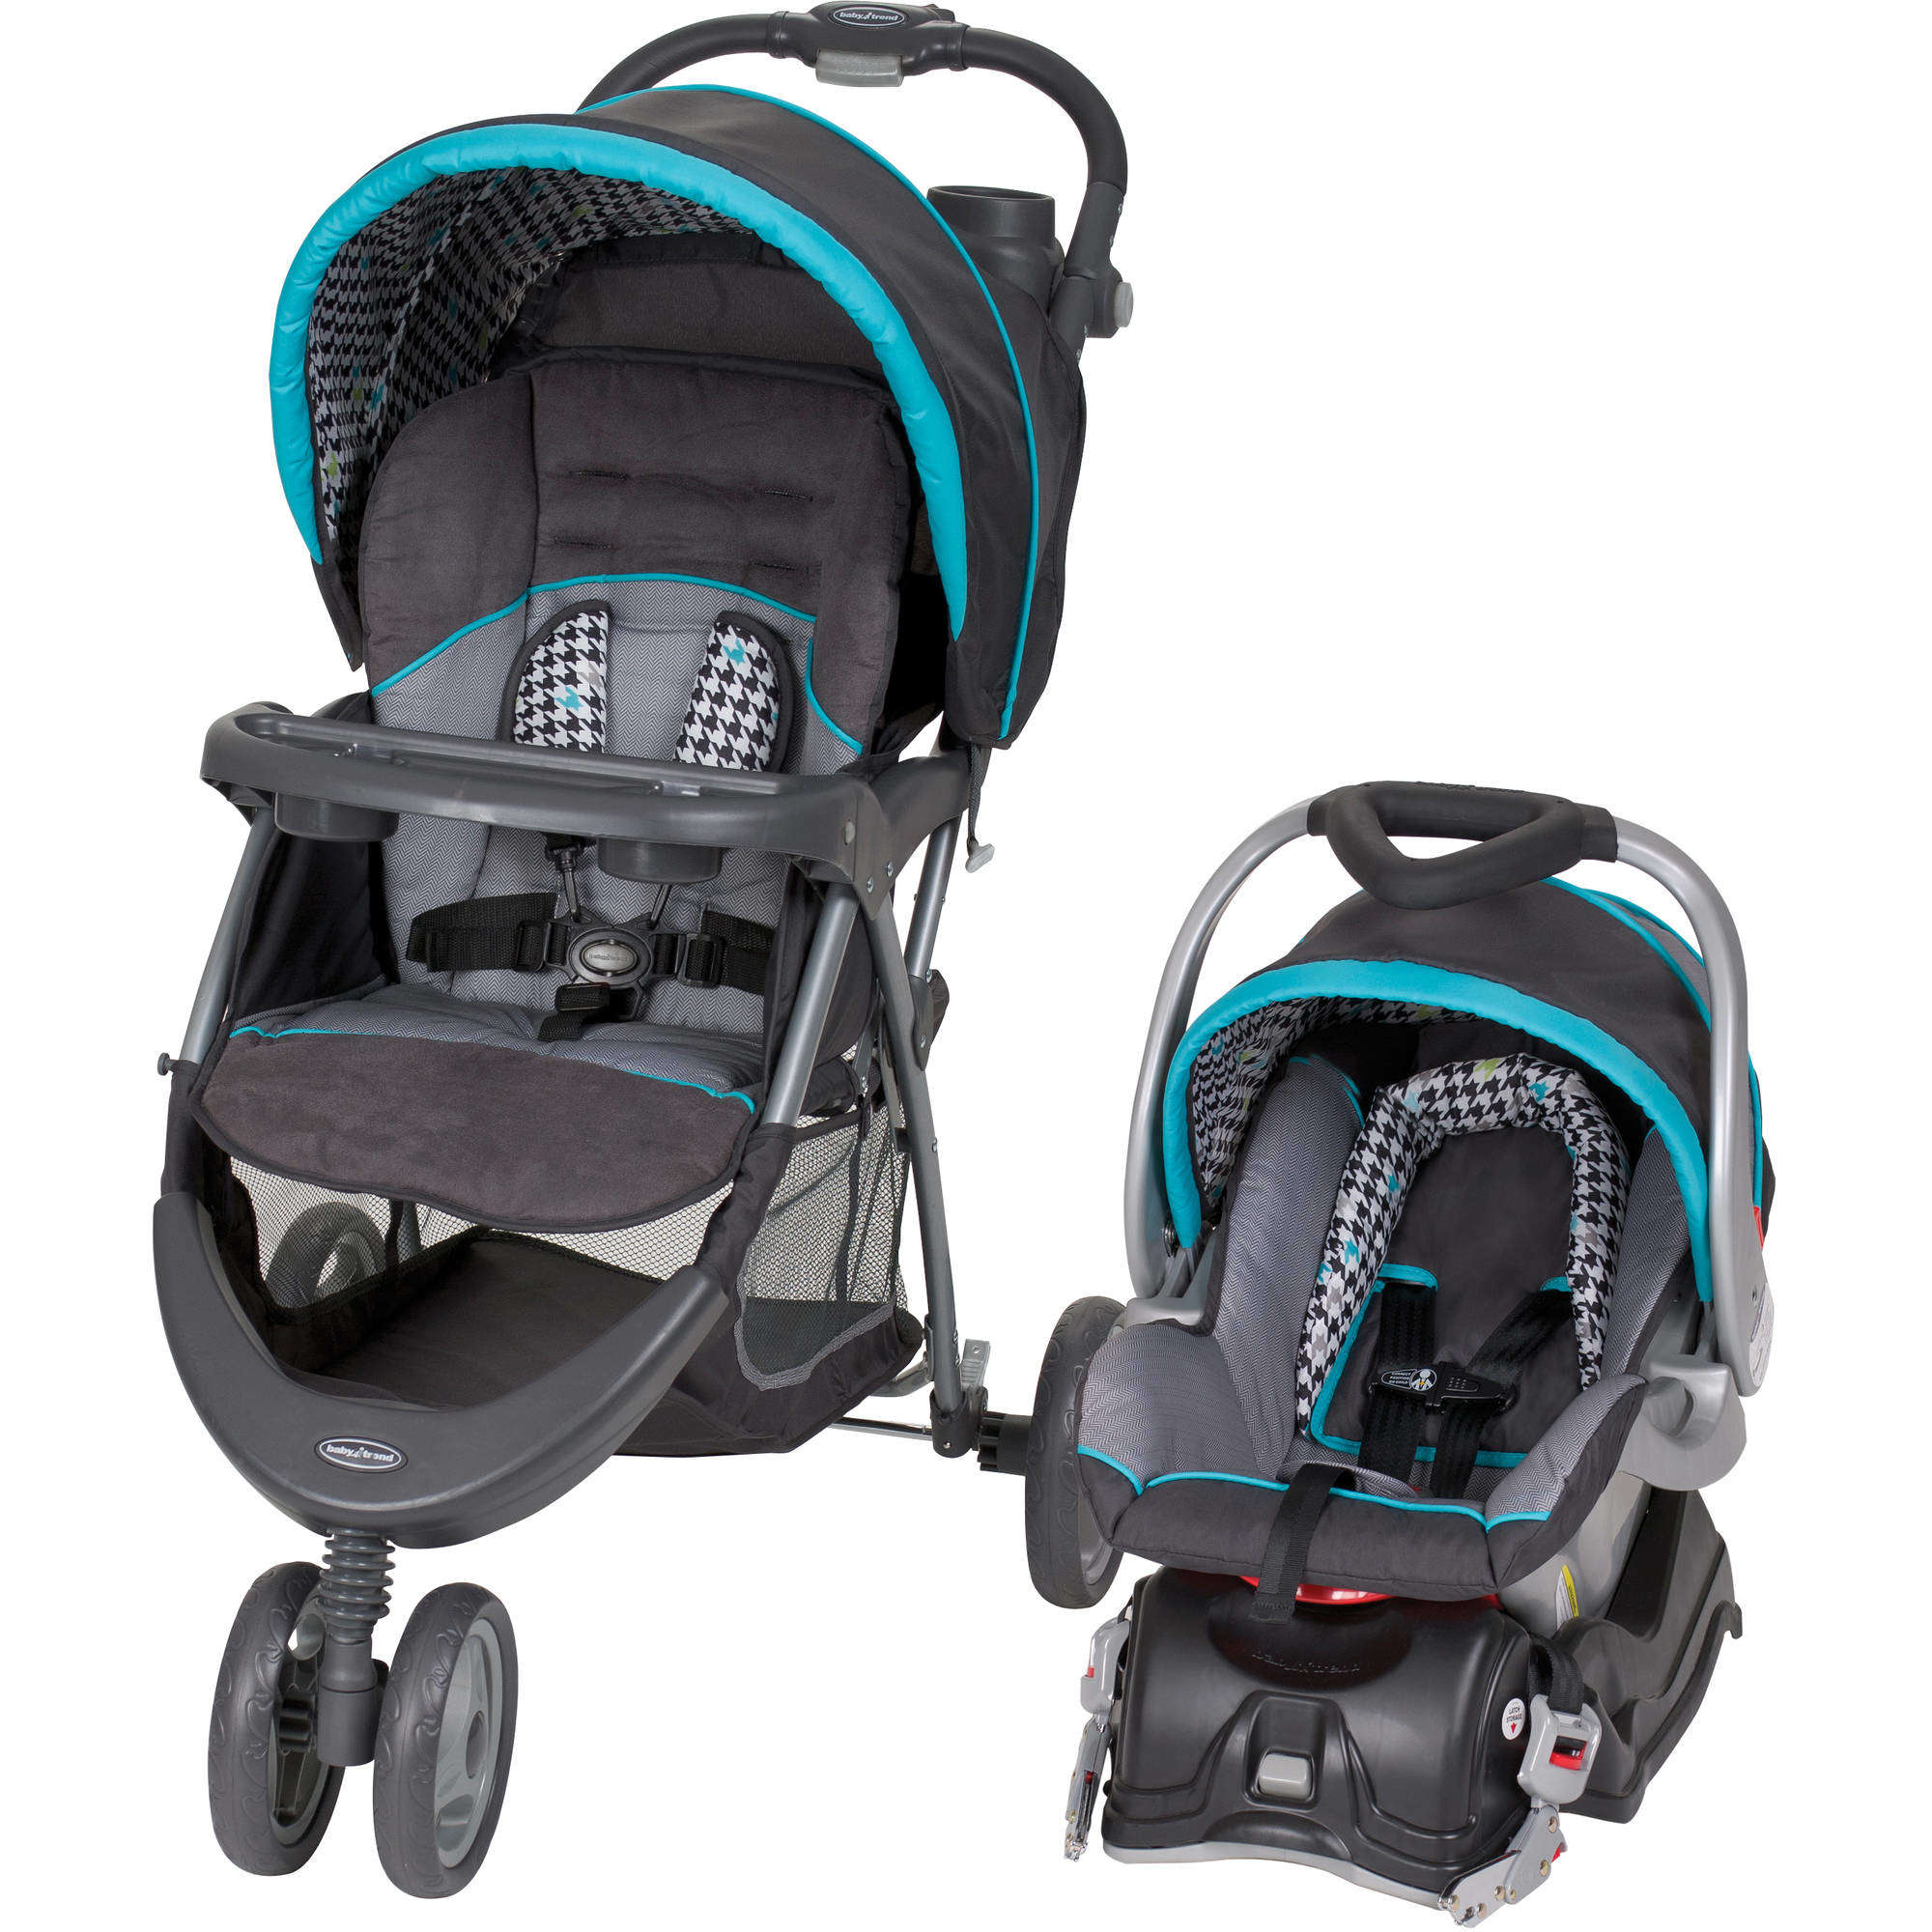 Baby Trend EZ Ride 5 Travel System, Houndstooth Blue - image 1 of 6